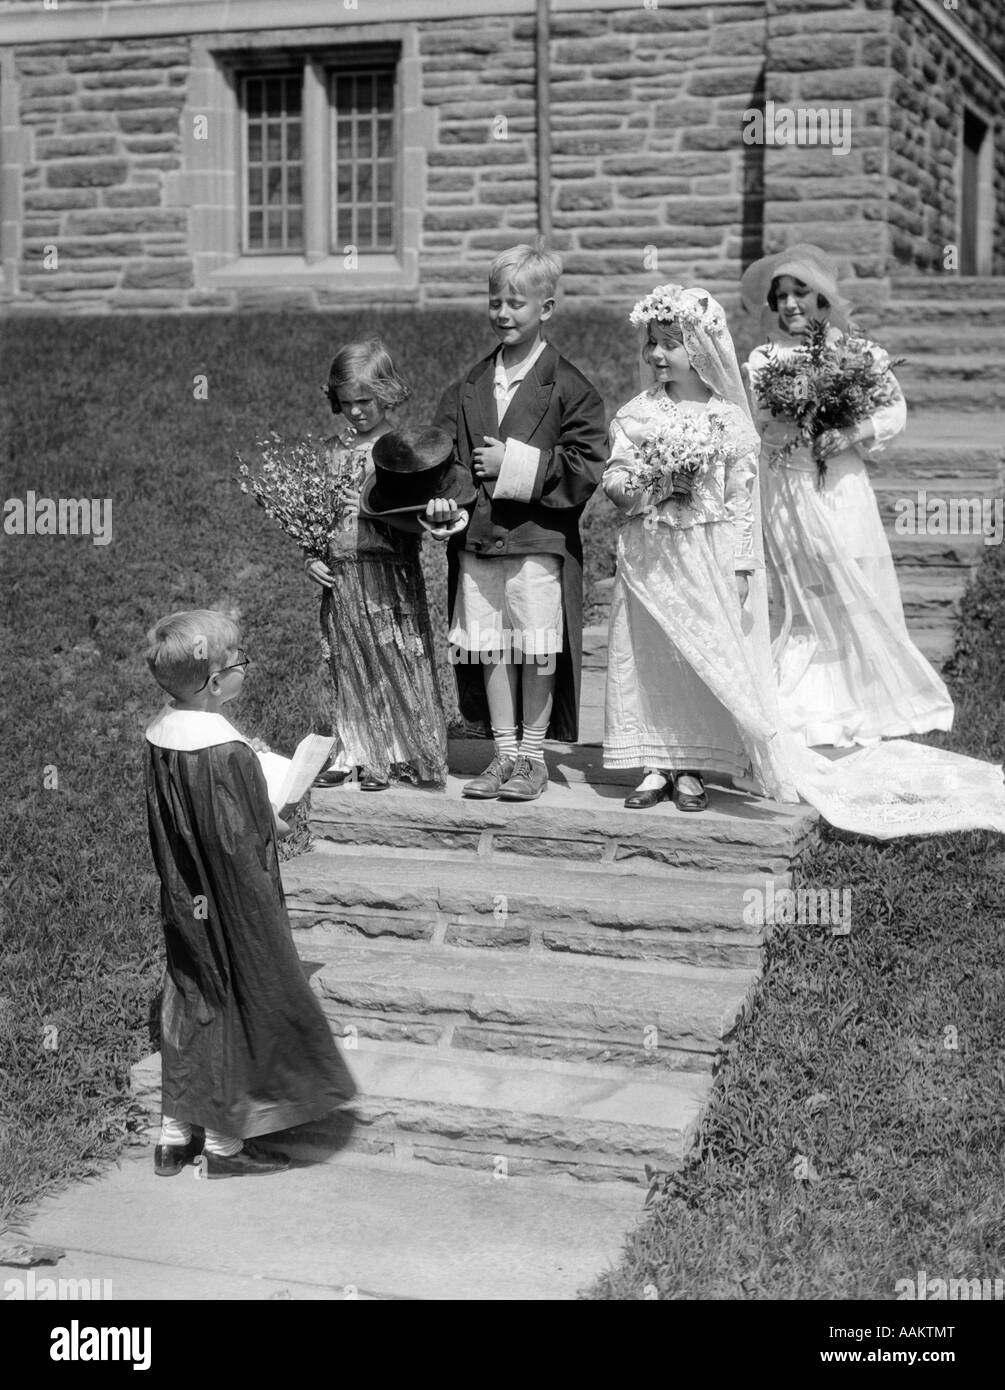 1930s CHILDREN BOYS AND GIRLS PLAYING BRIDE GROOM TOM THUMB WEDDING PARTY Stock Photo